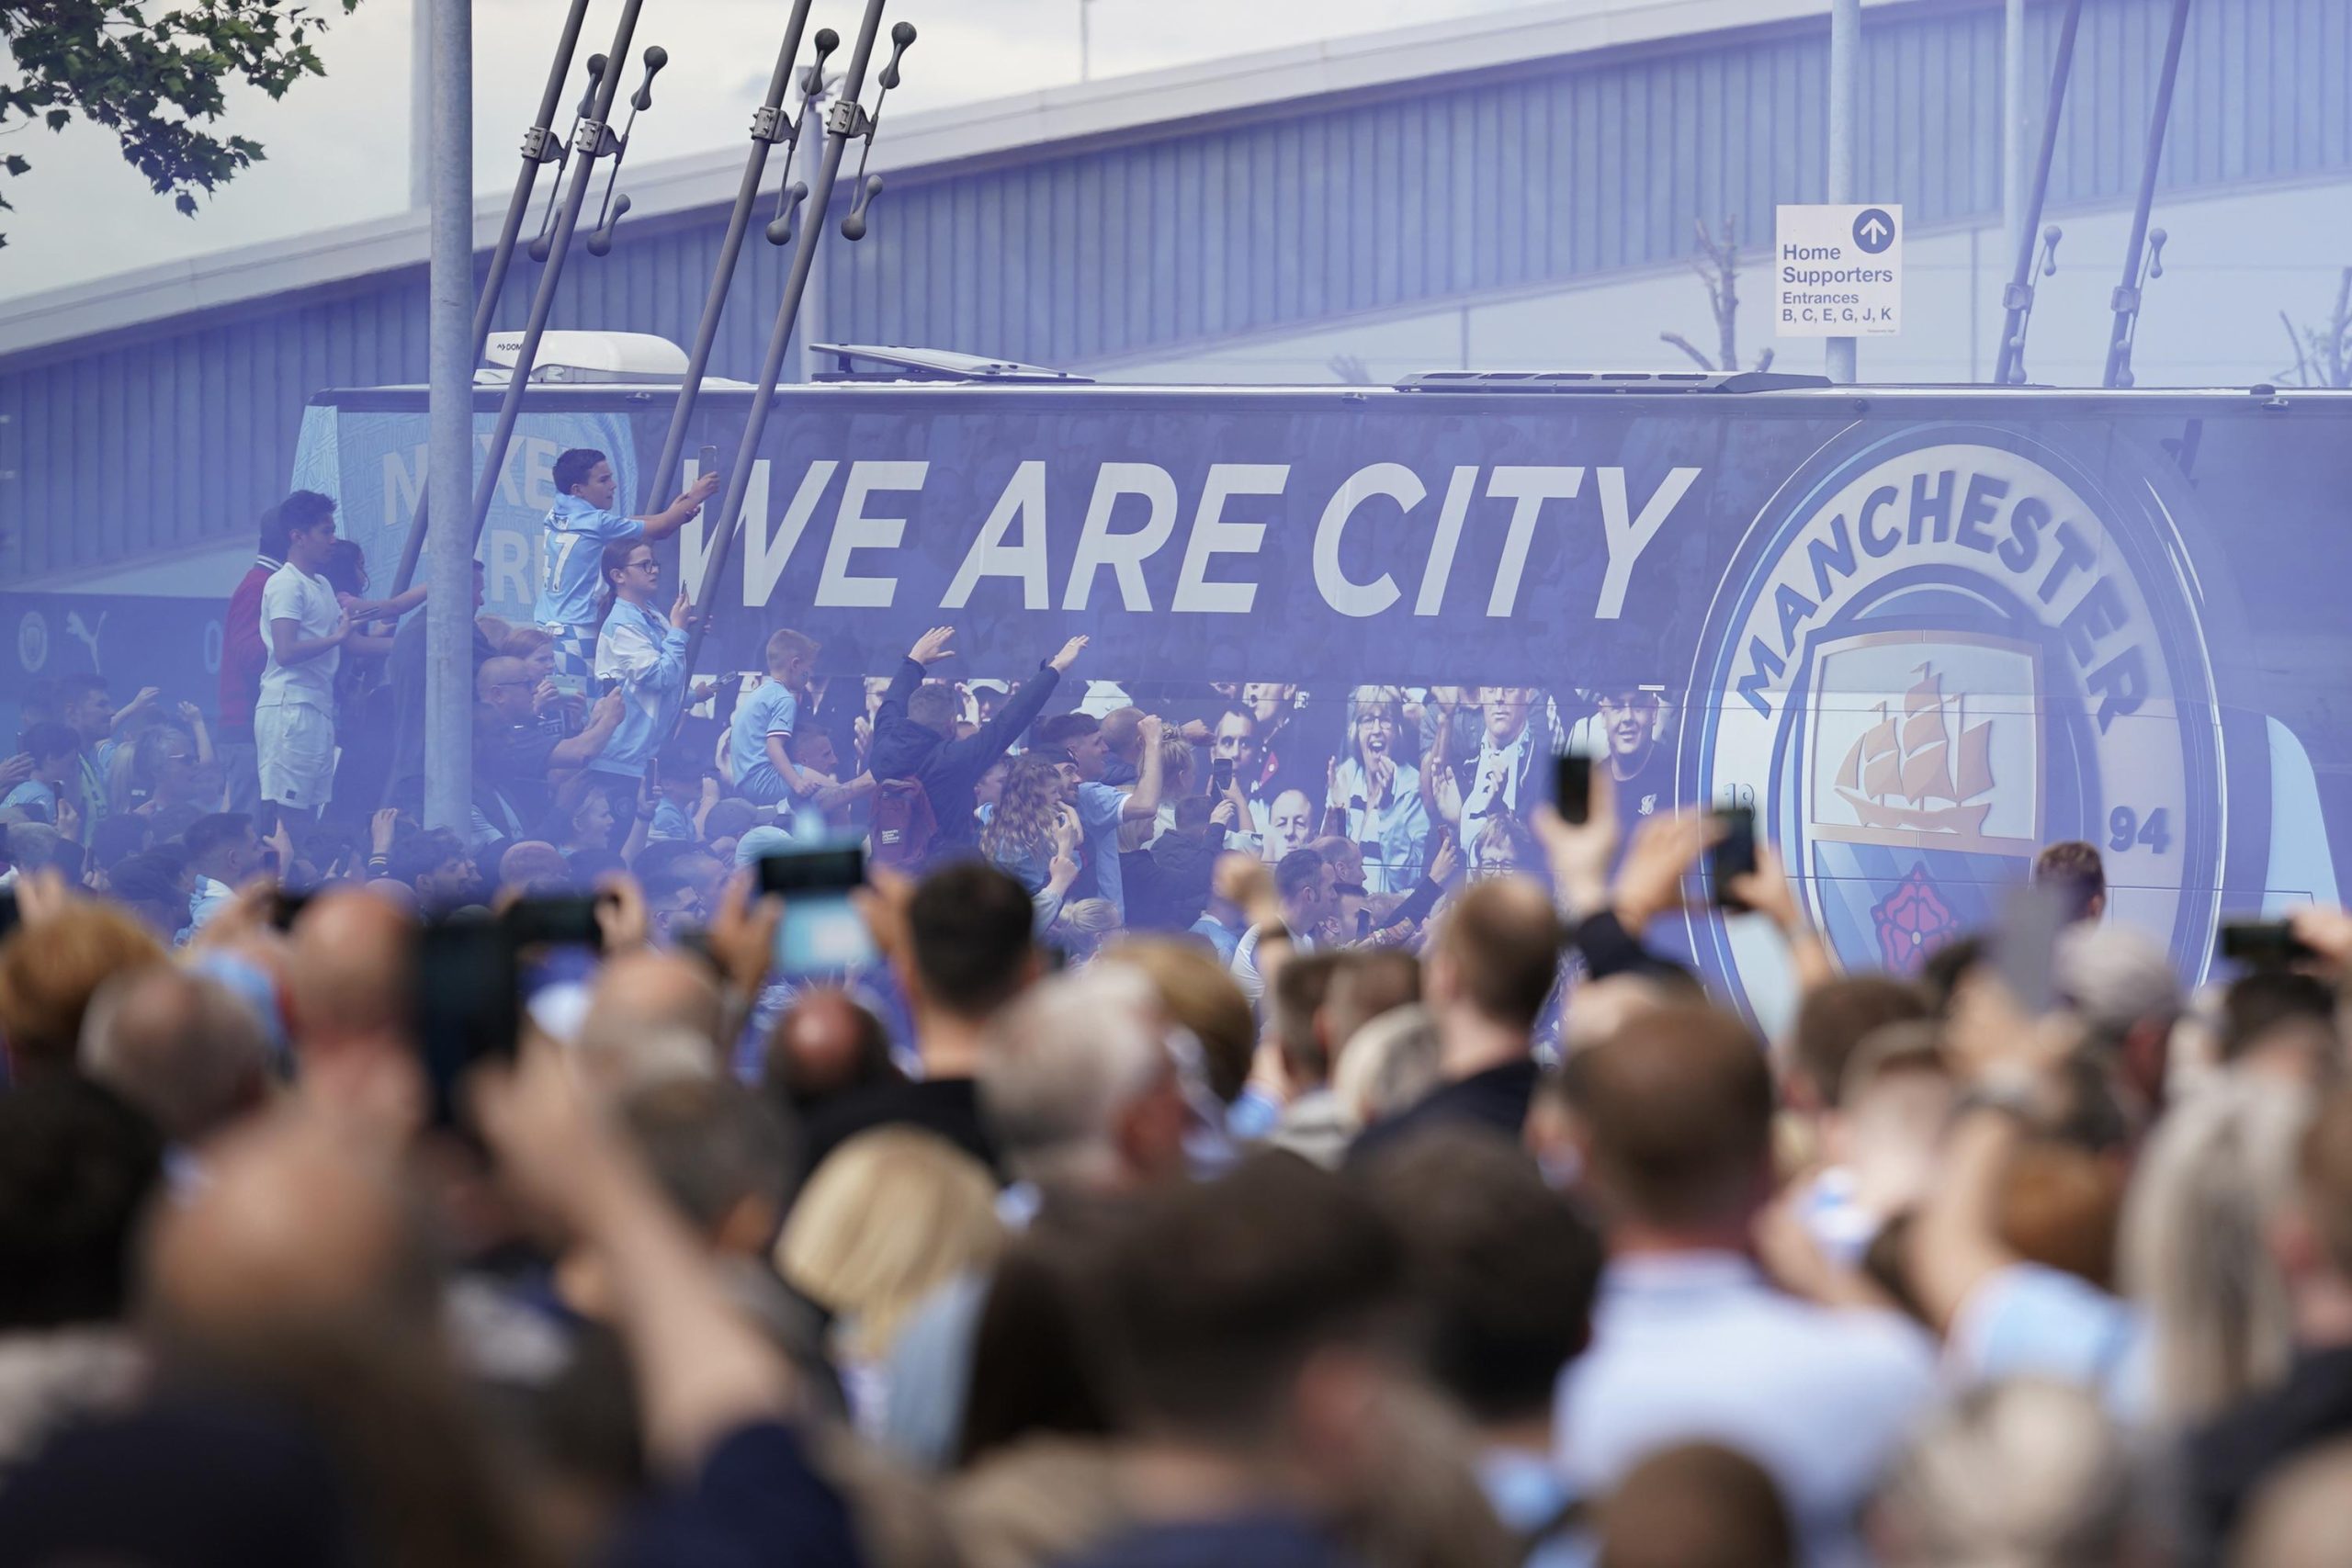 Man City accused of misleading Premier League over financial matters